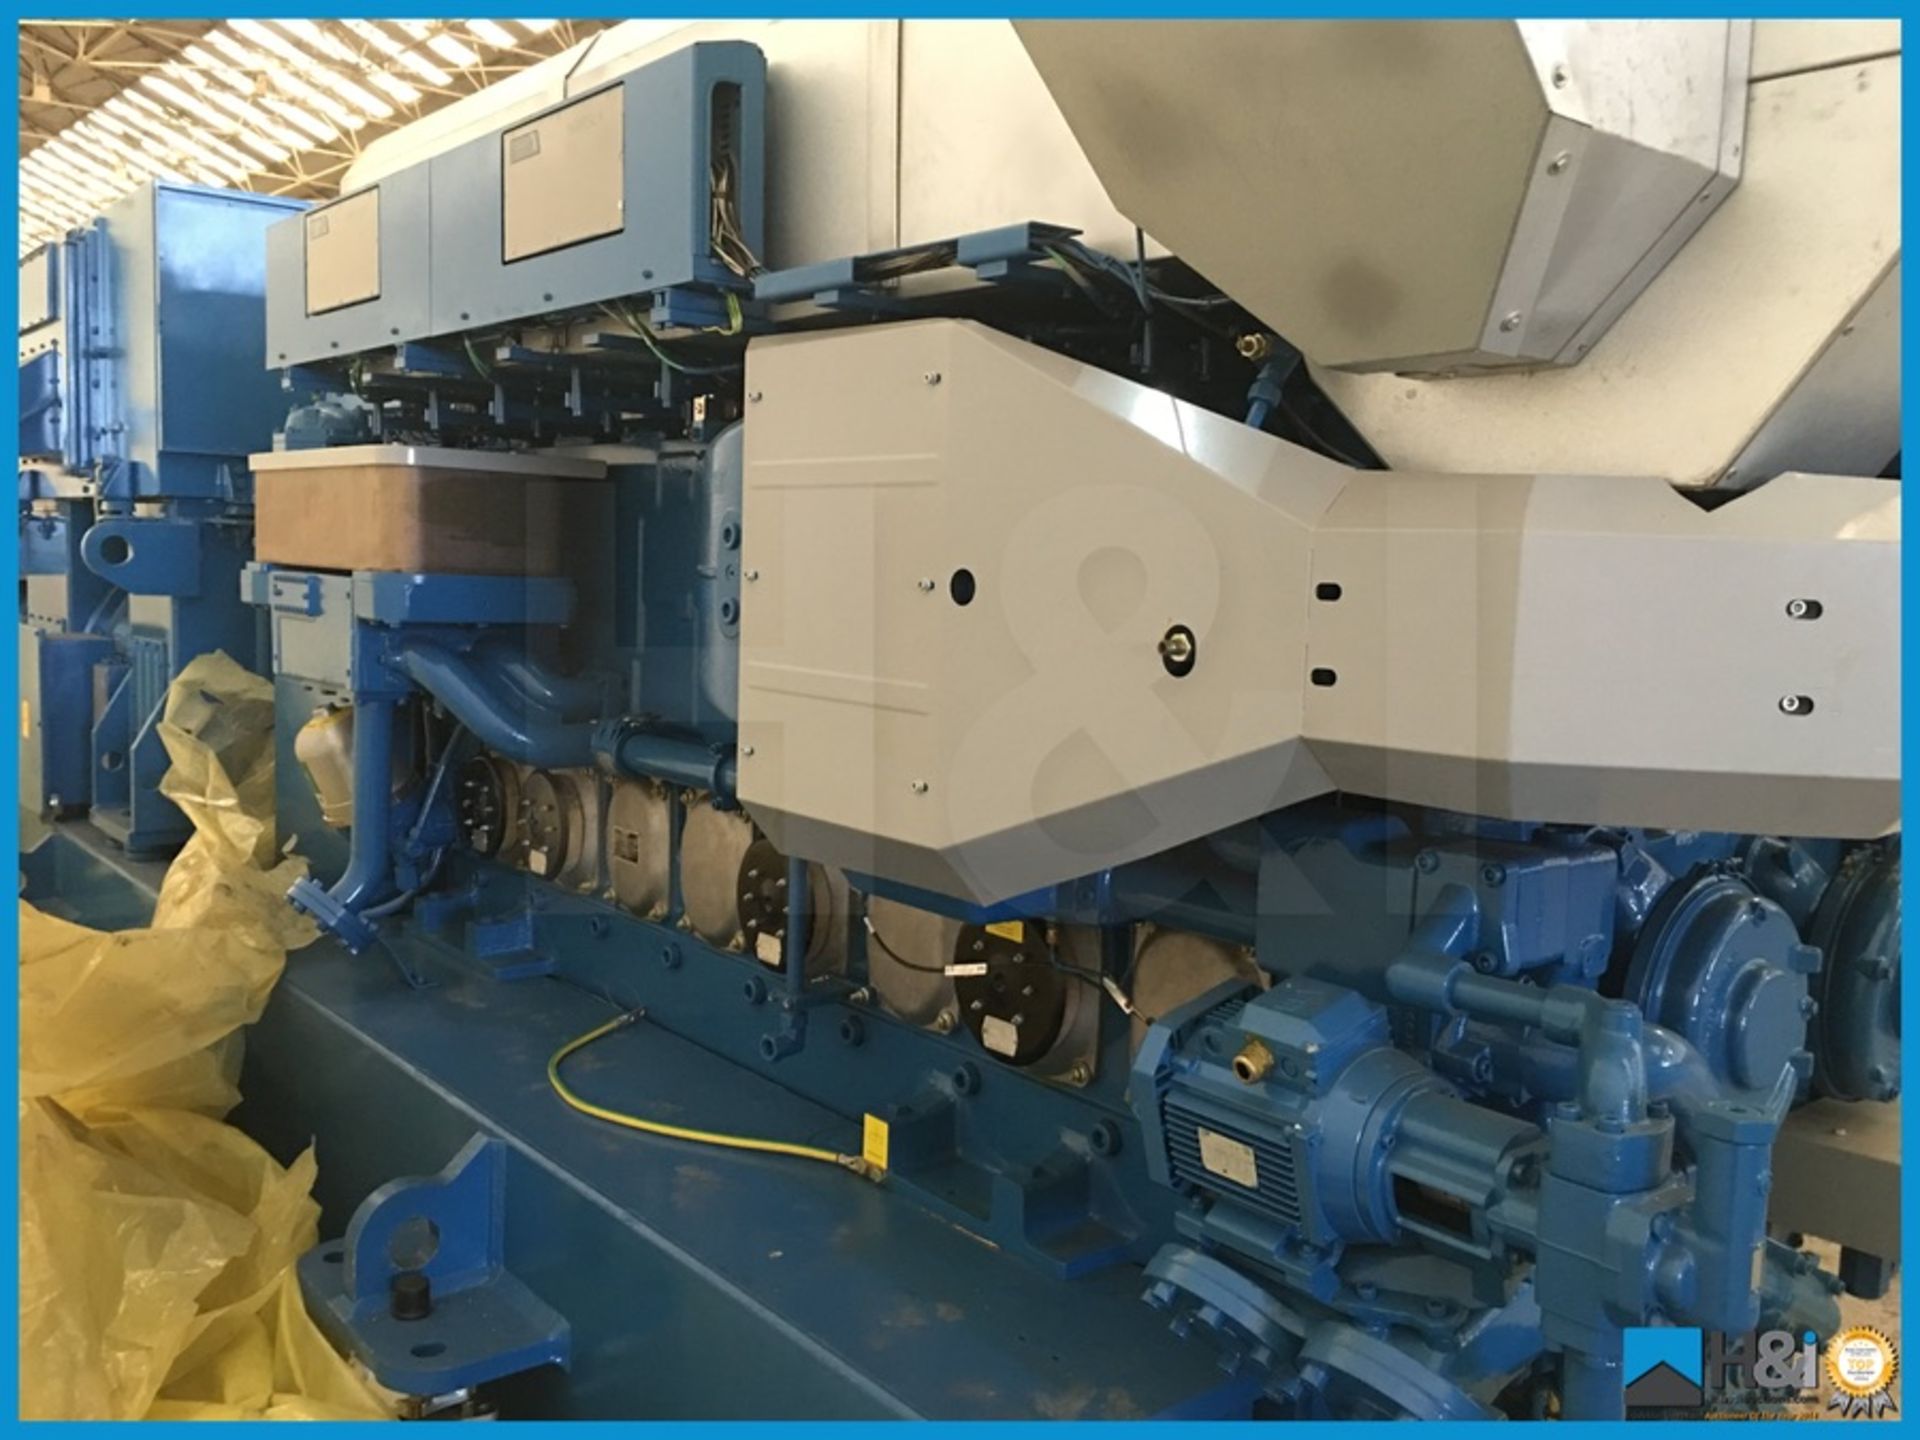 Unused Wartsila 8L20 high capacity diesel generator manufactured in 2013 for a large marine - Image 12 of 19